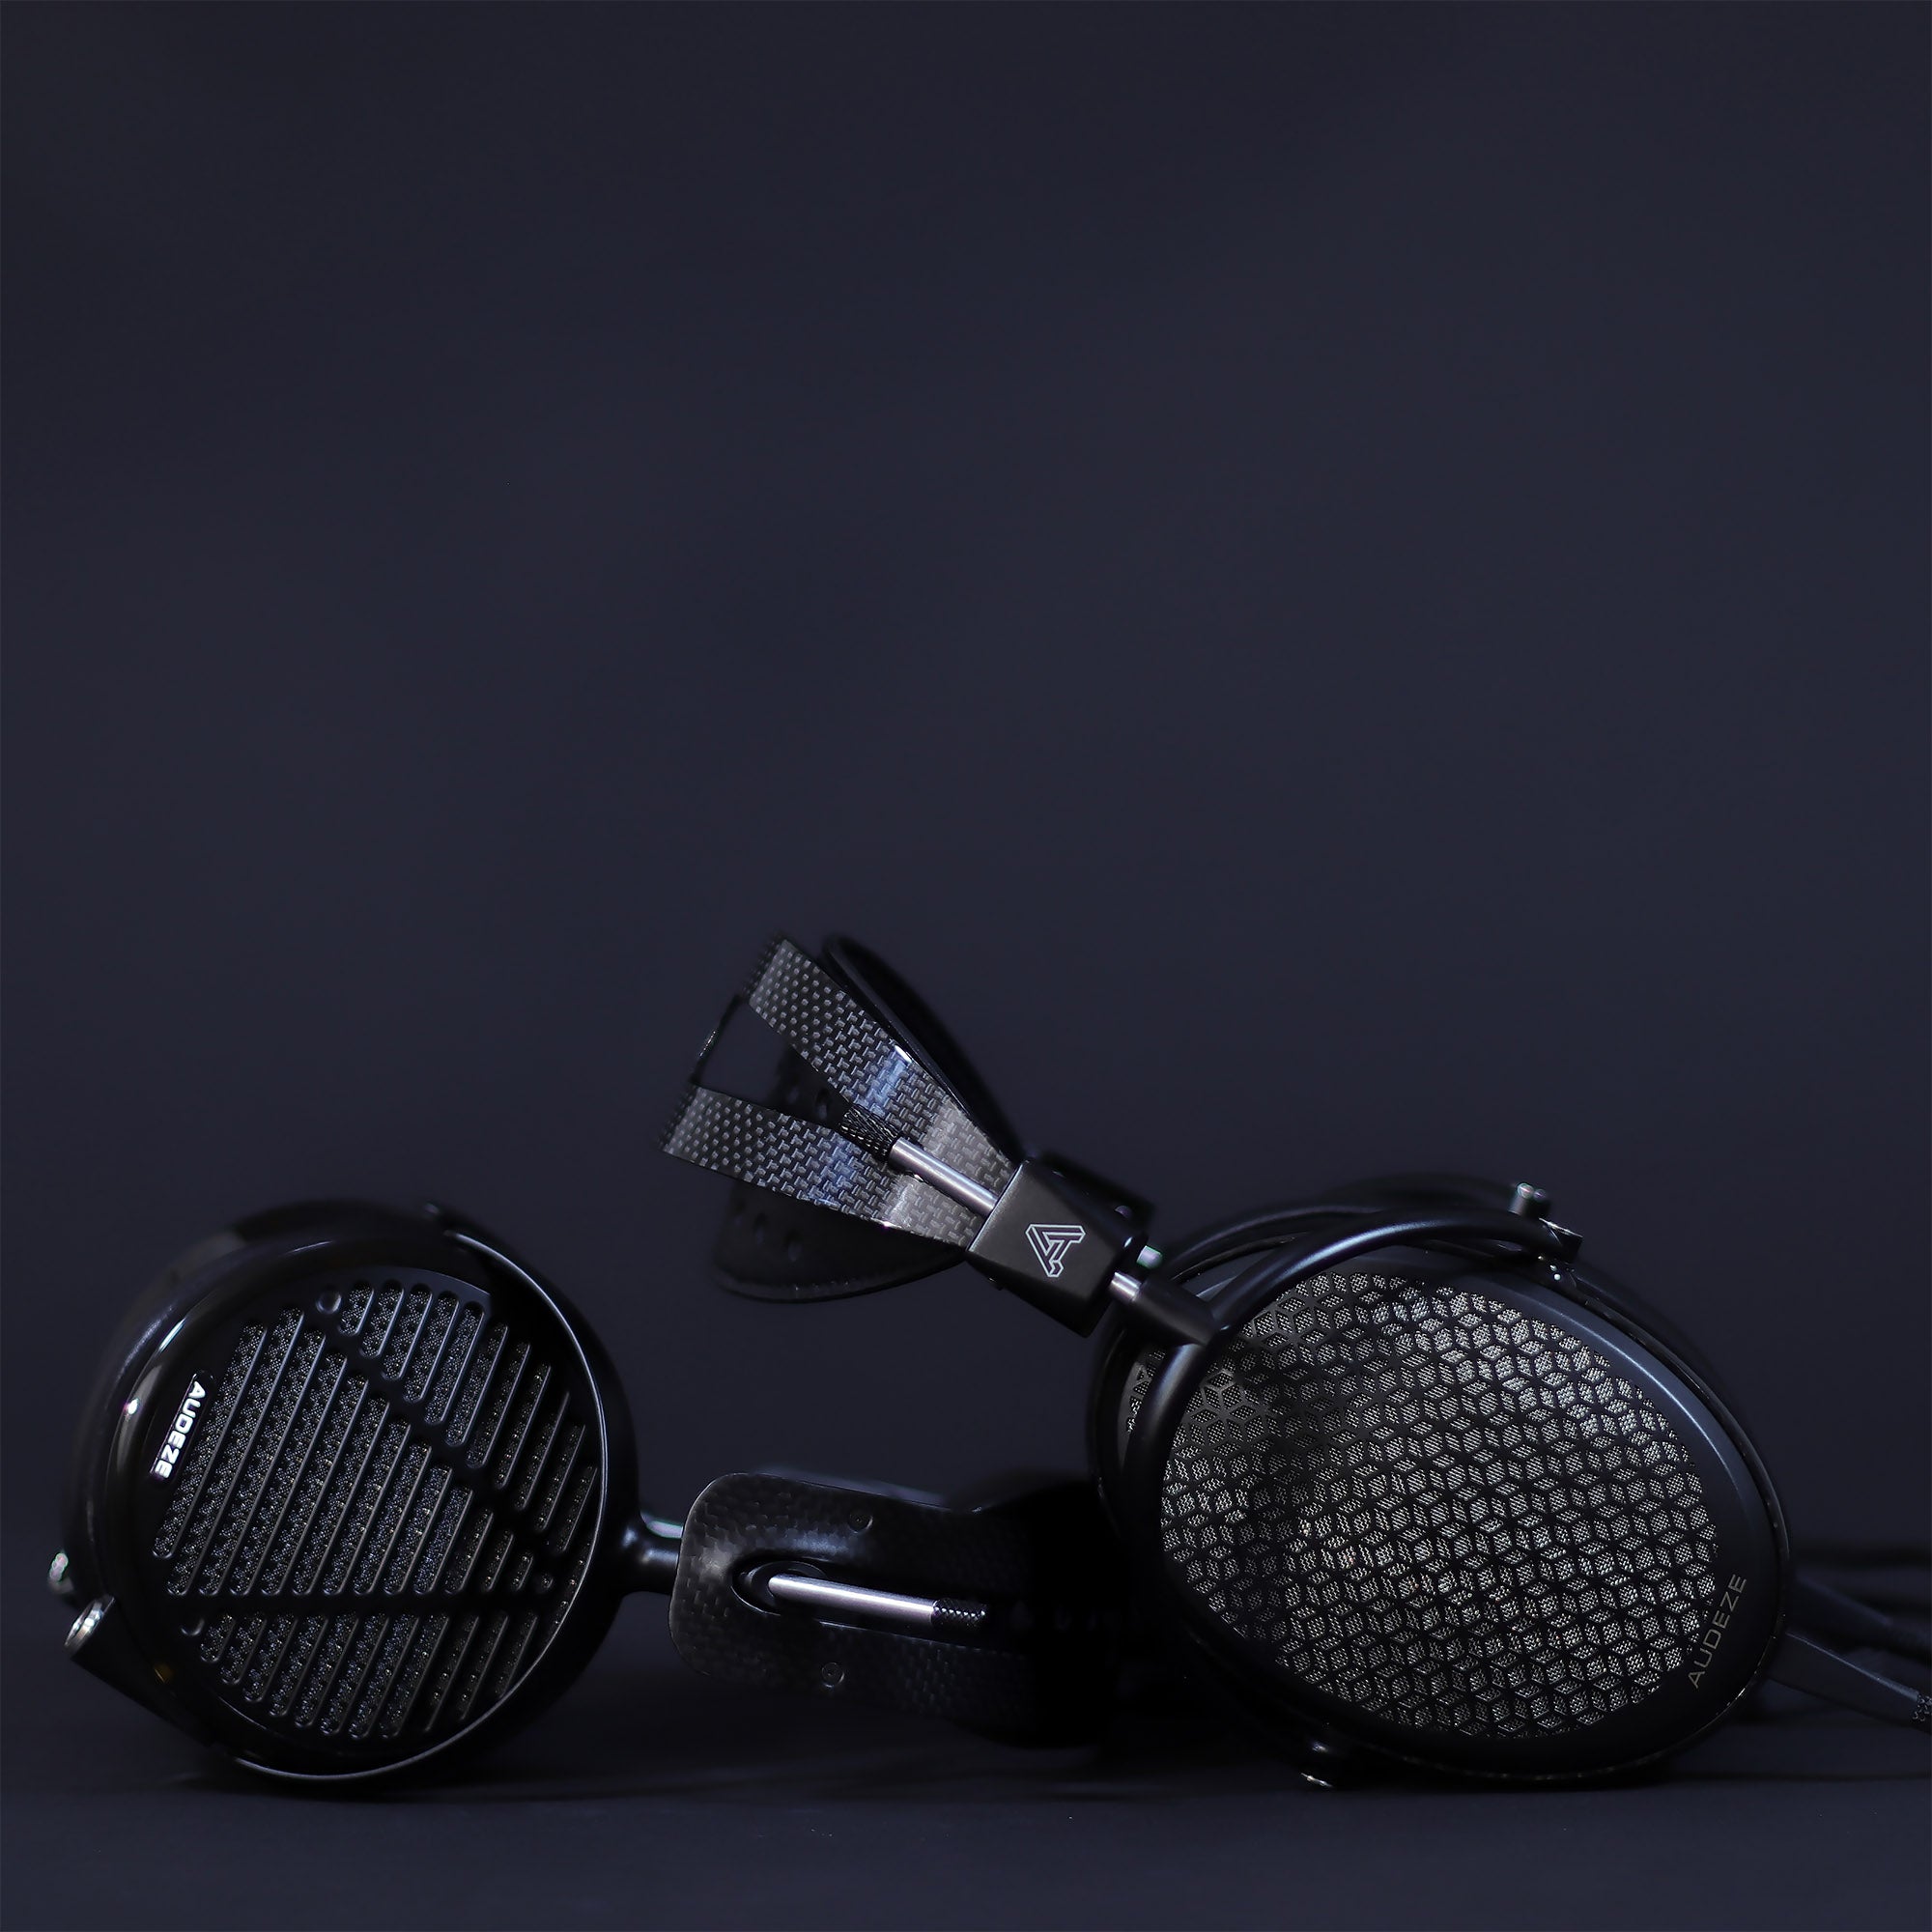 Tale of Two Titans - Audeze LCD 5 & CRBN Review